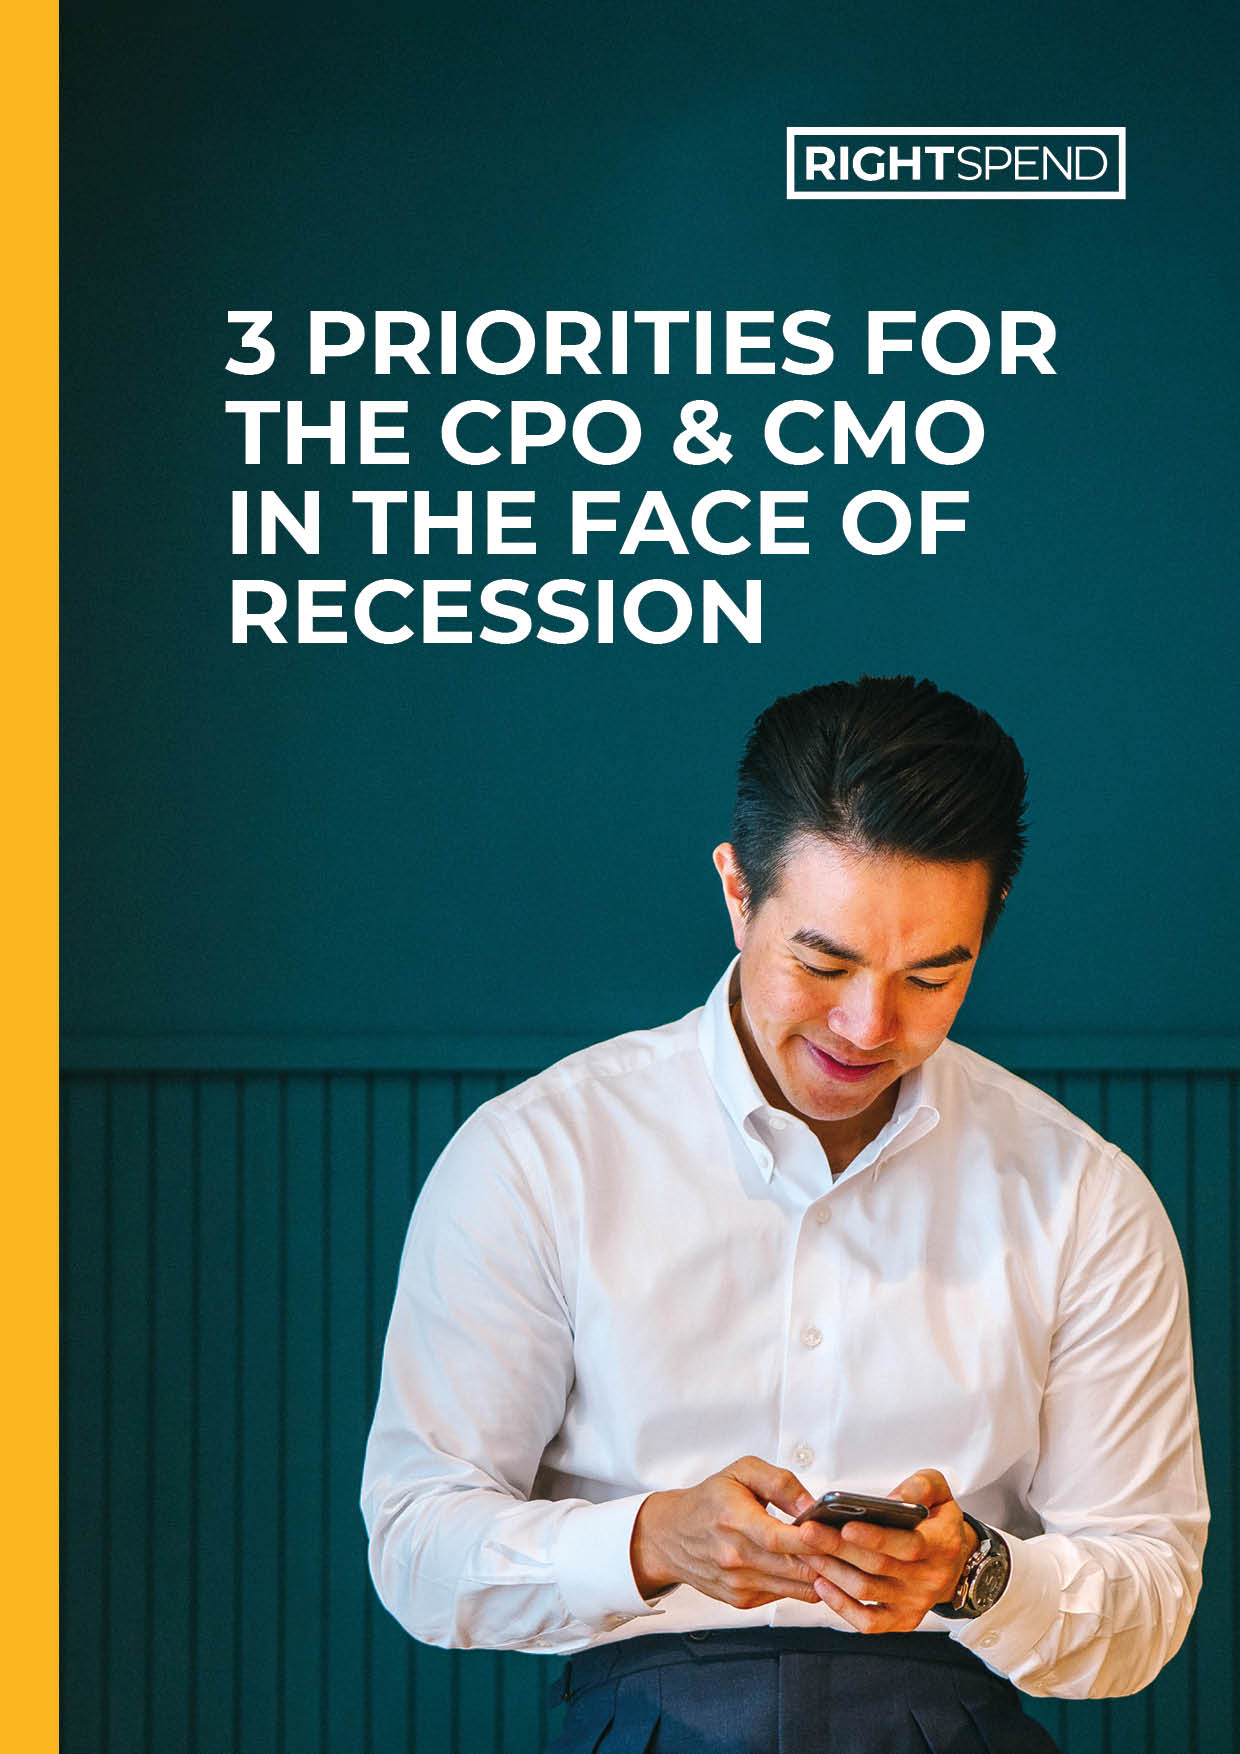 Thumbnail- 3 priorities for the CPO & CMO in the face of recession